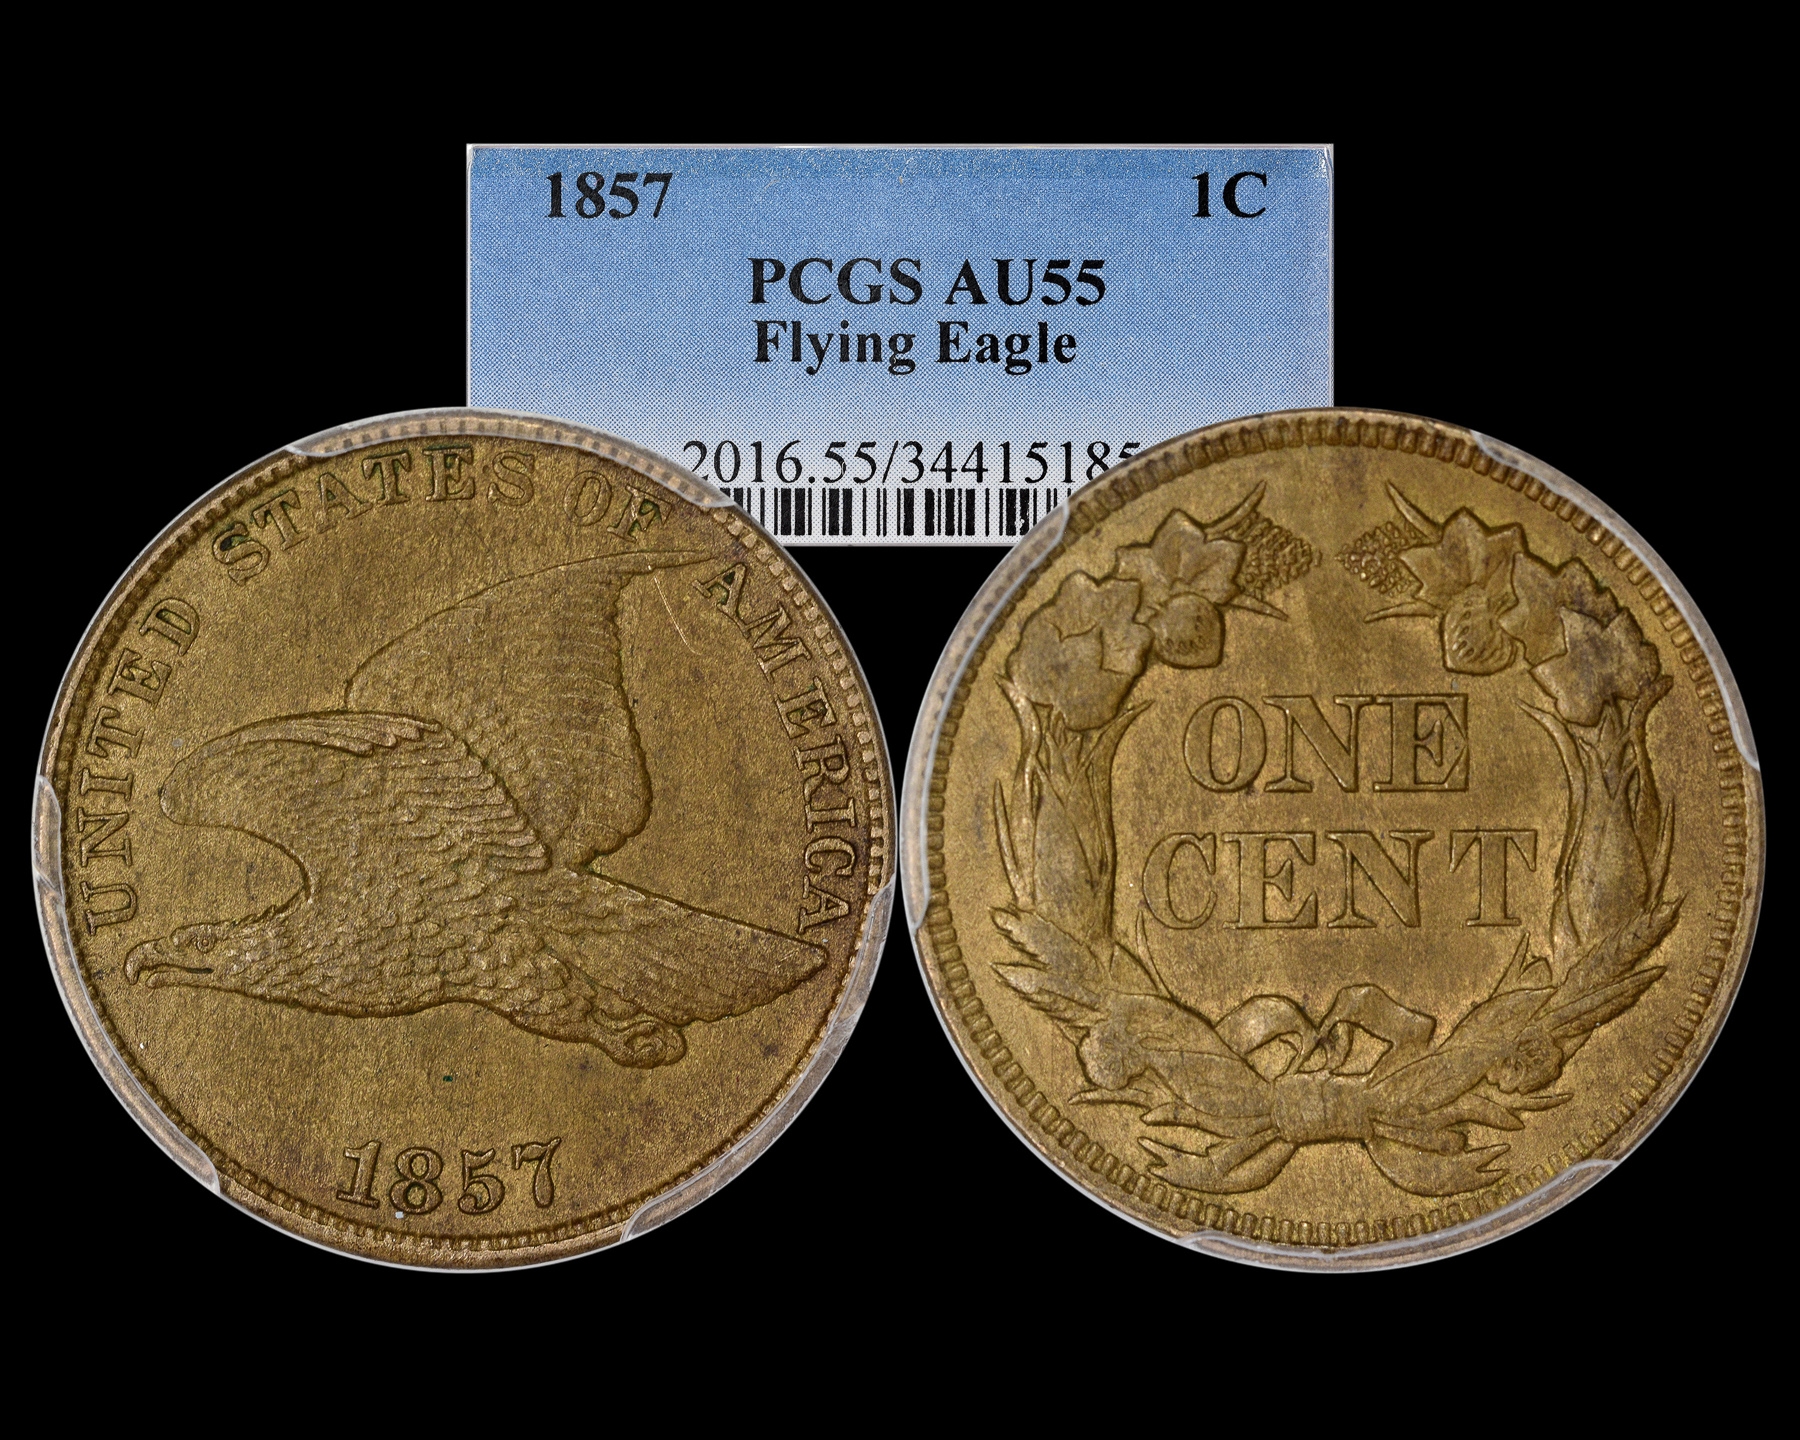 1857 1C Flying Eagle Cent PCGS AU55 - The Penny Lady®